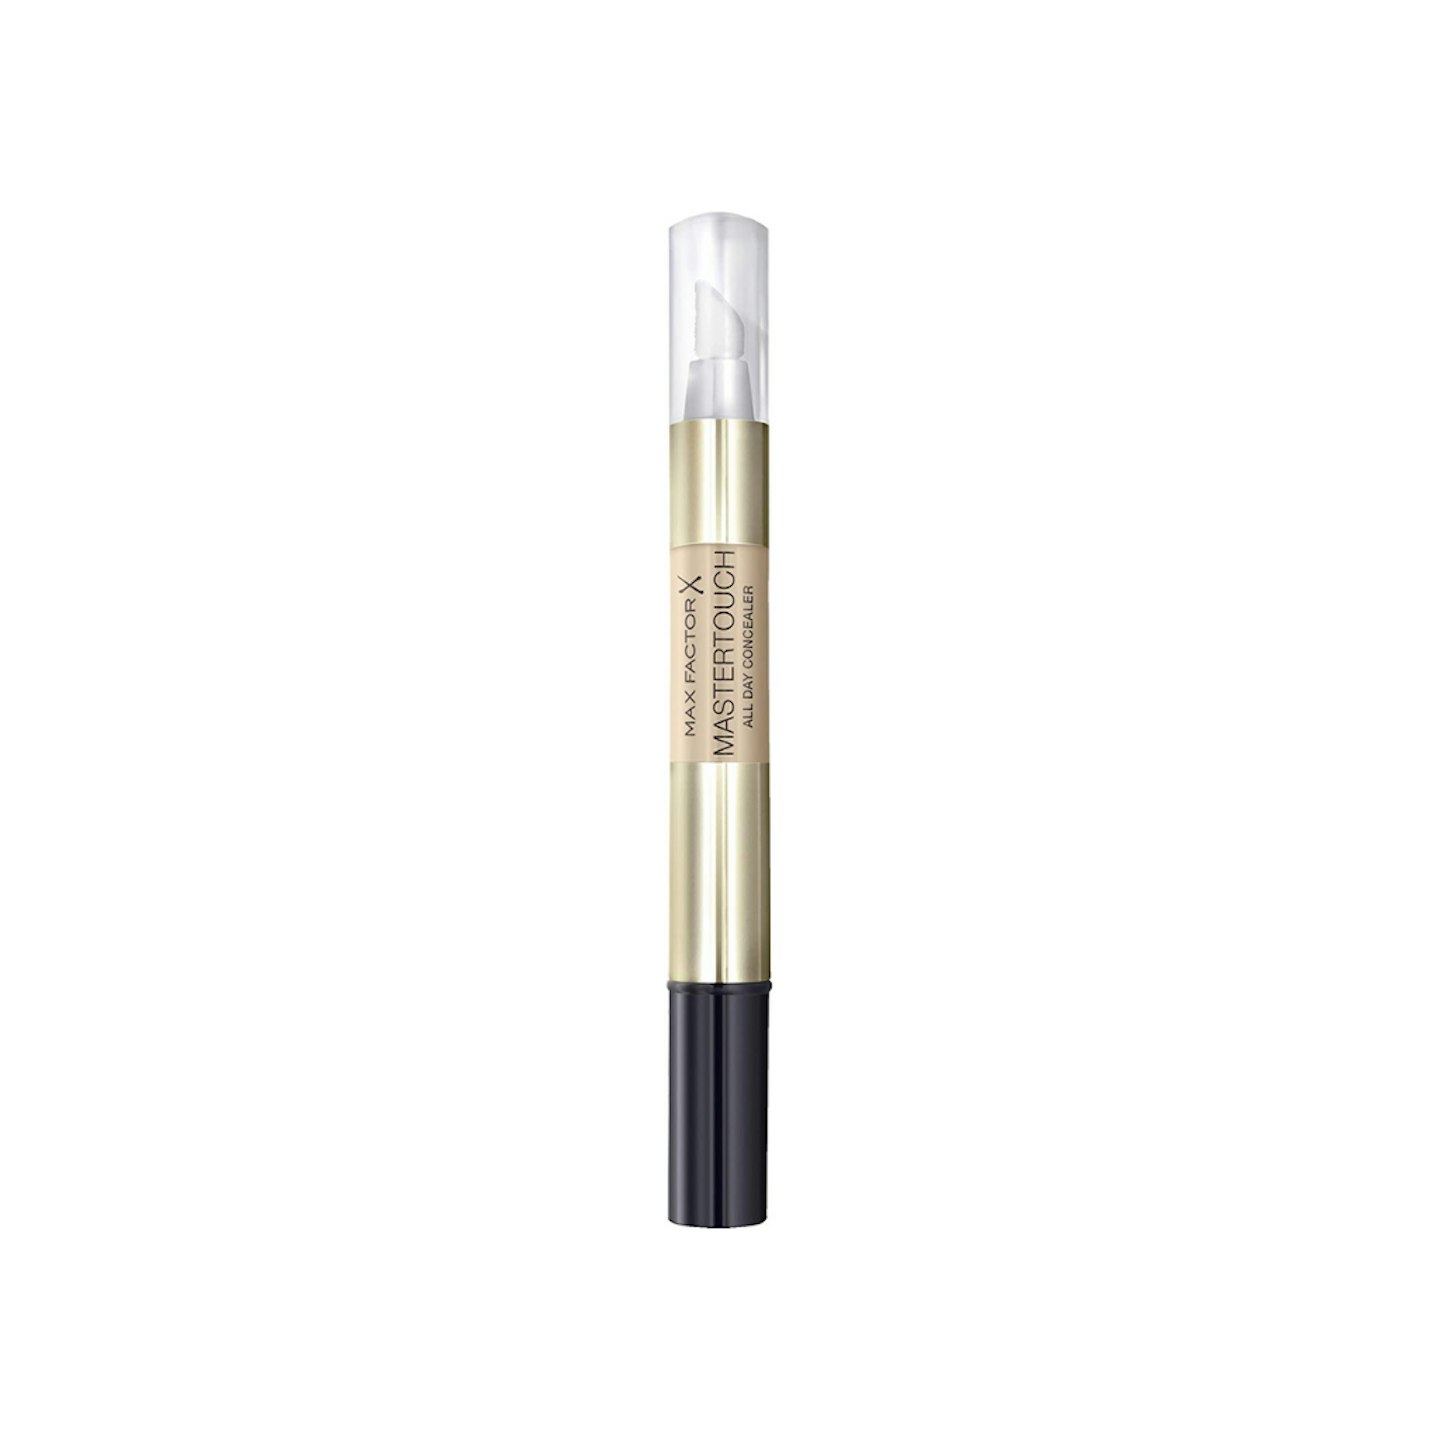 Max Factor Mastertouch All Day Concealer Pen, SPF 10